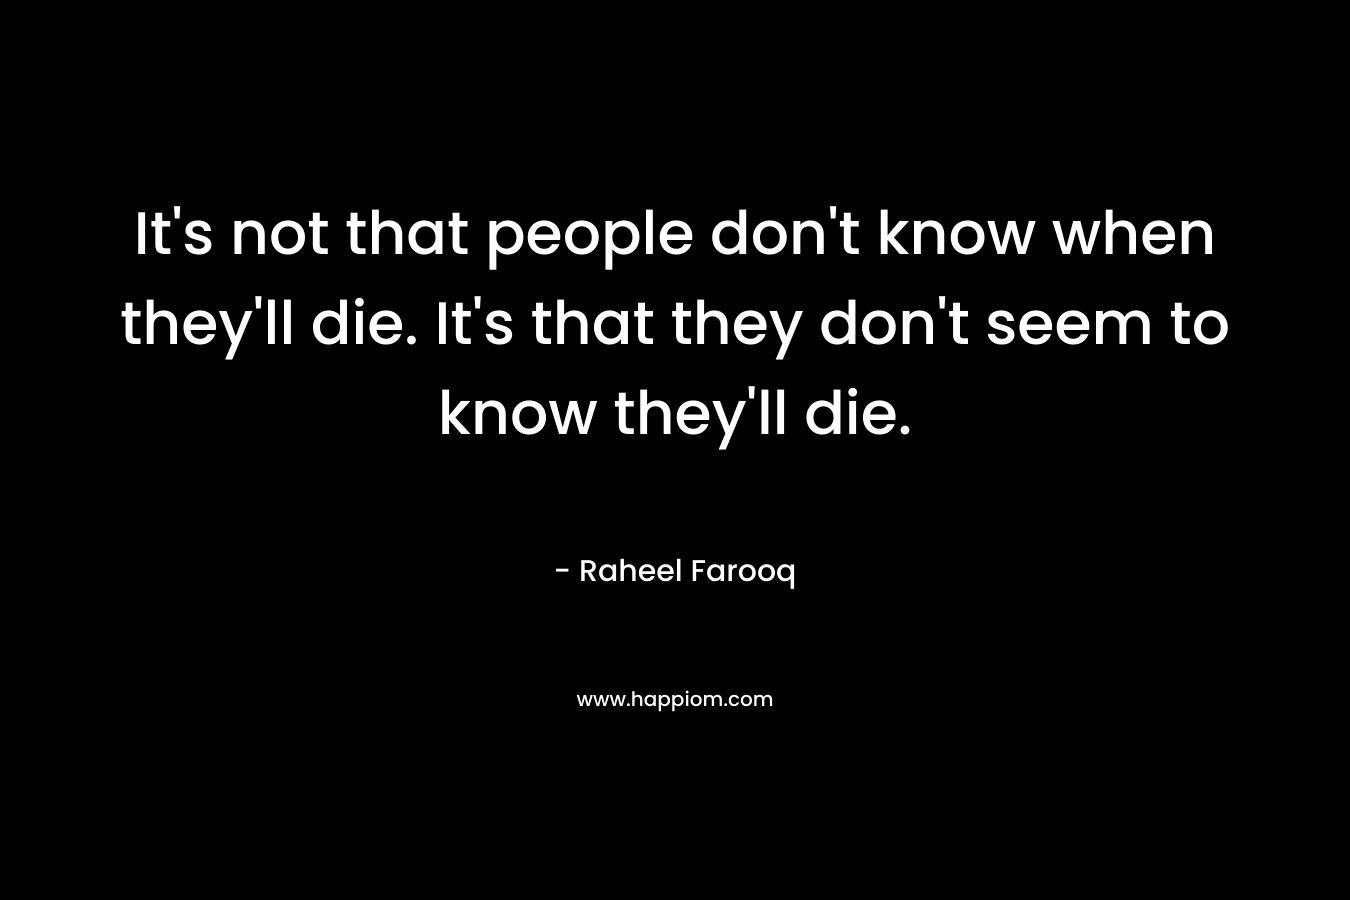 It’s not that people don’t know when they’ll die. It’s that they don’t seem to know they’ll die. – Raheel Farooq